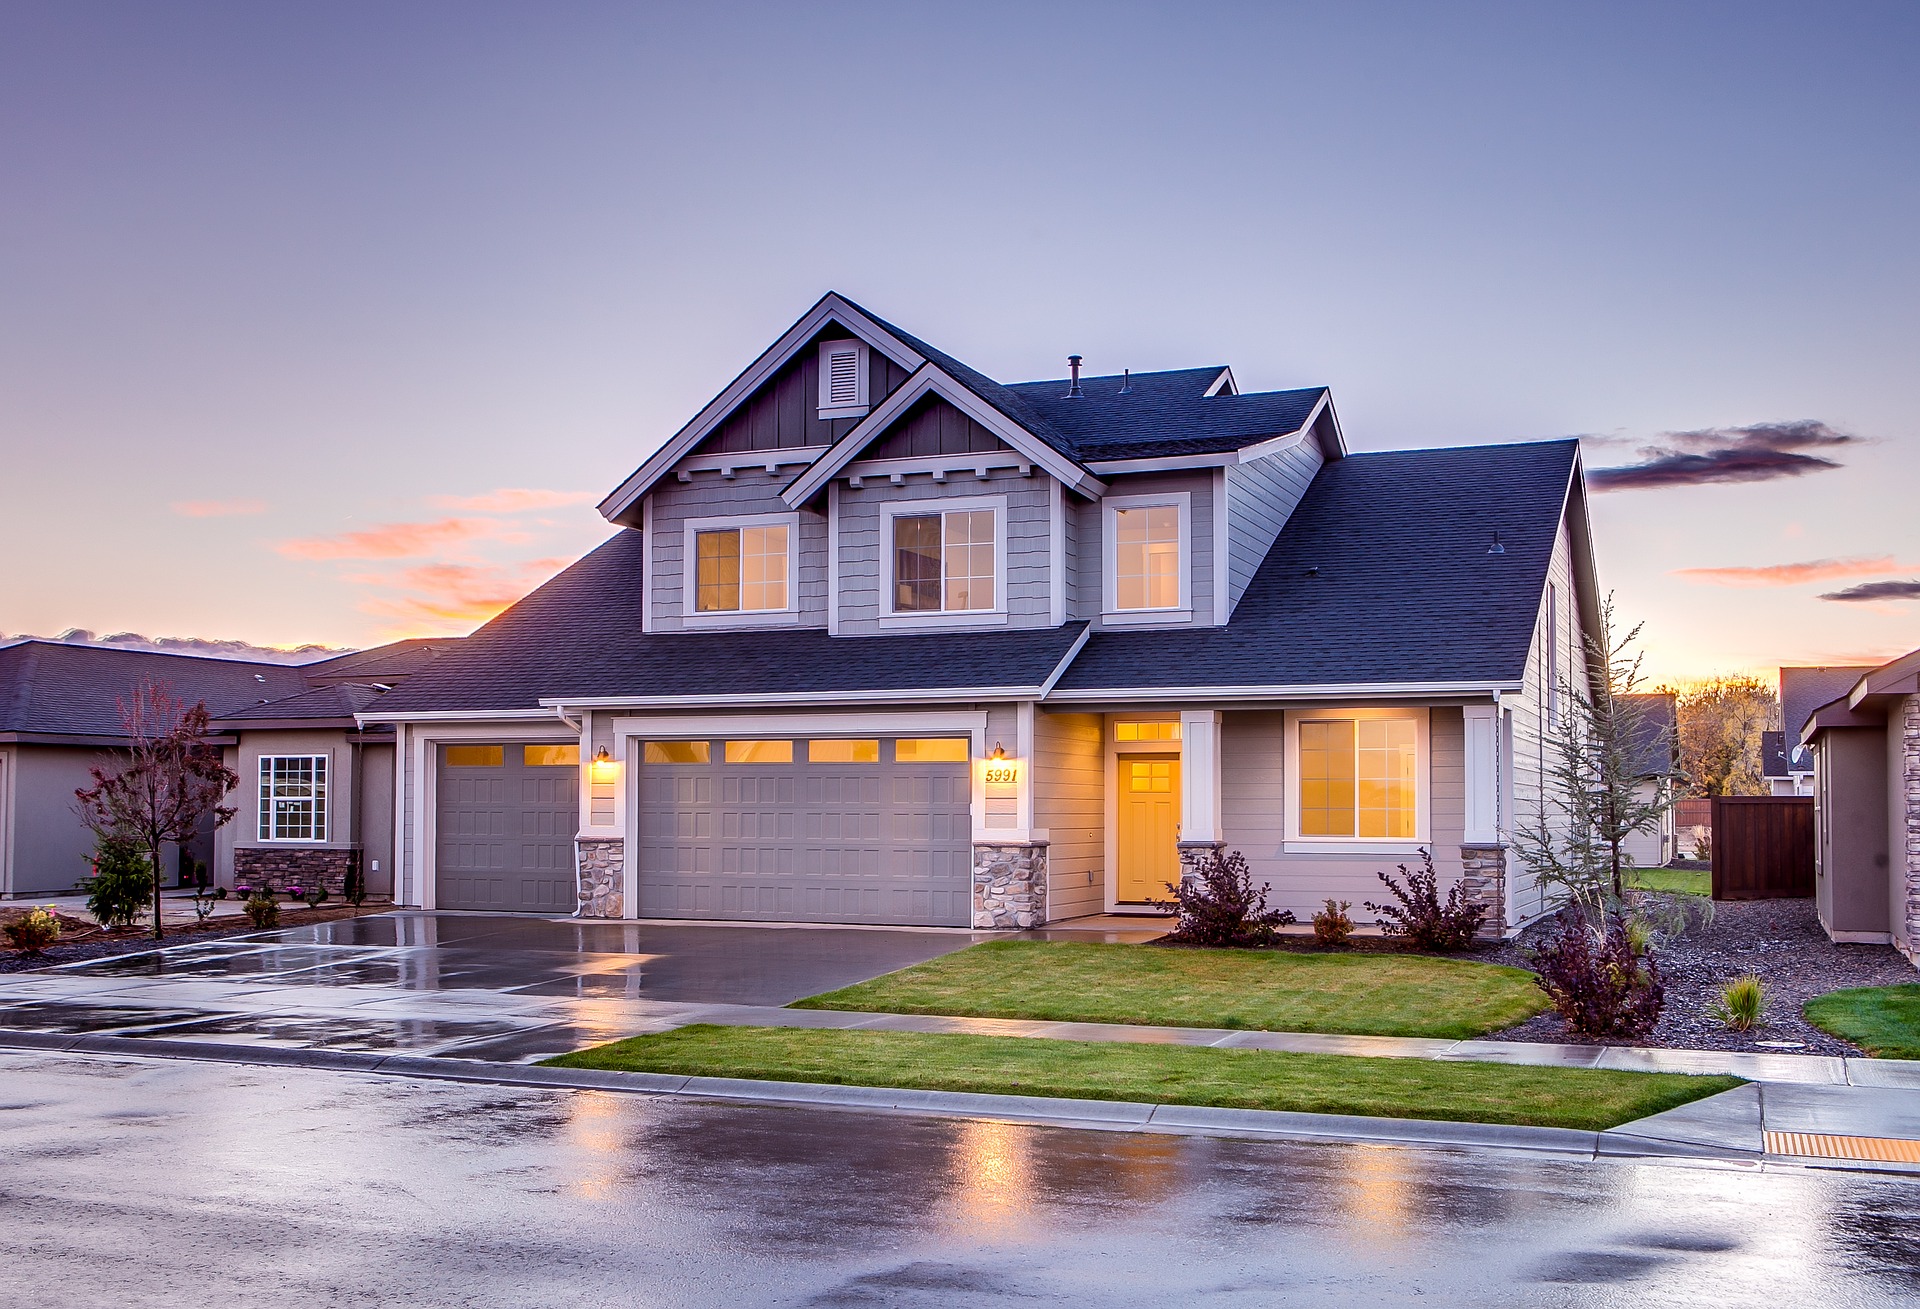 A Look At The 2018 Real Estate Market And What To Look For In 2019.